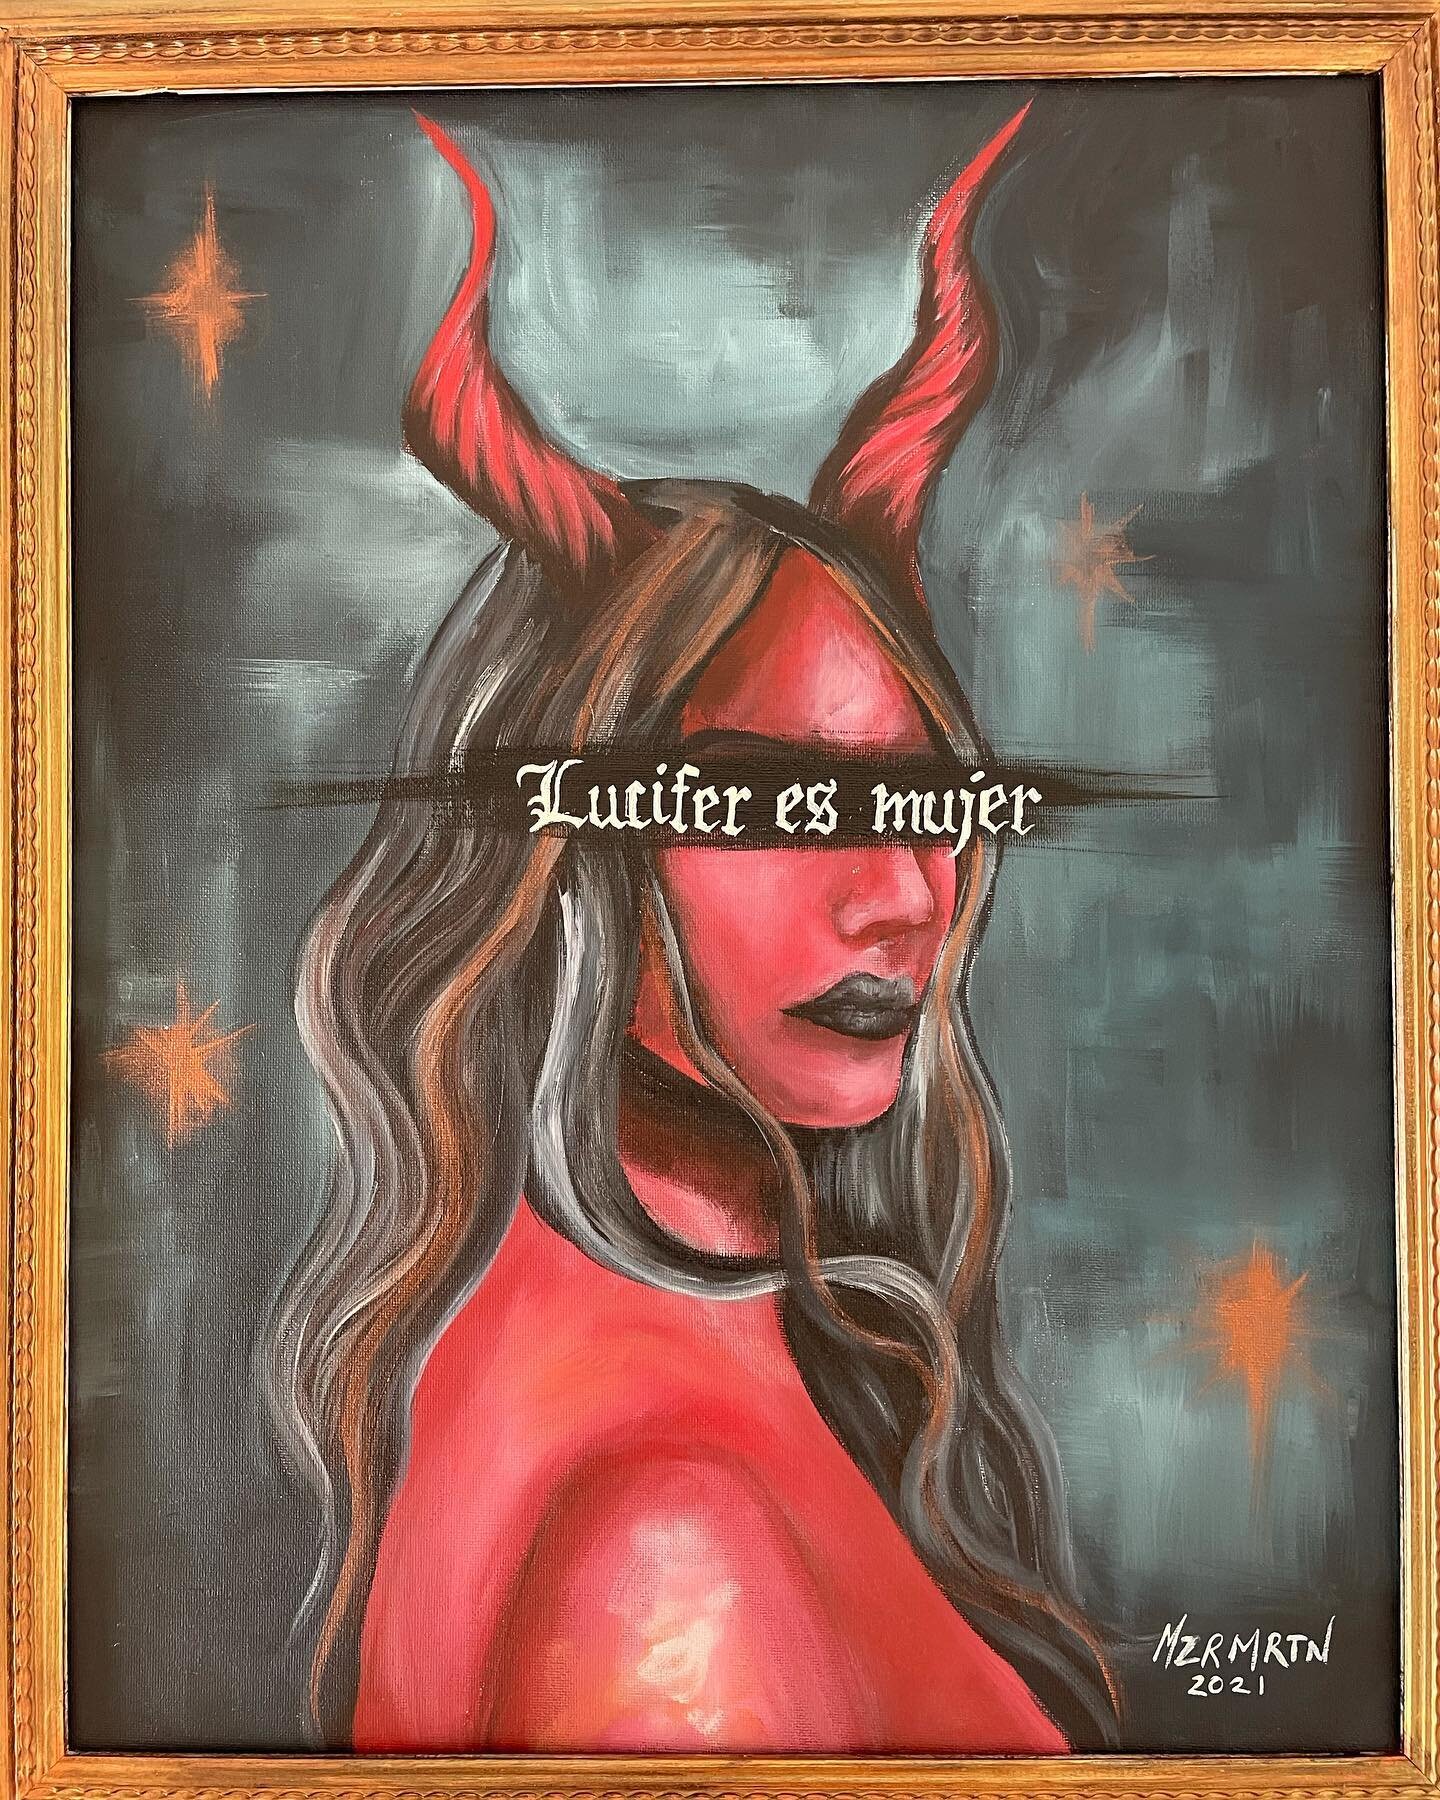 🫀Lucifer es mujer🫀 

This is the piece I showed at yesterday&rsquo;s &ldquo;Unbroken&rdquo; art show organized by  @thestranglerscollective 

16x24&rdquo; Acrylic on canvas.Already framed in a carved wood frame, ready to be hung on the wall. &mdash